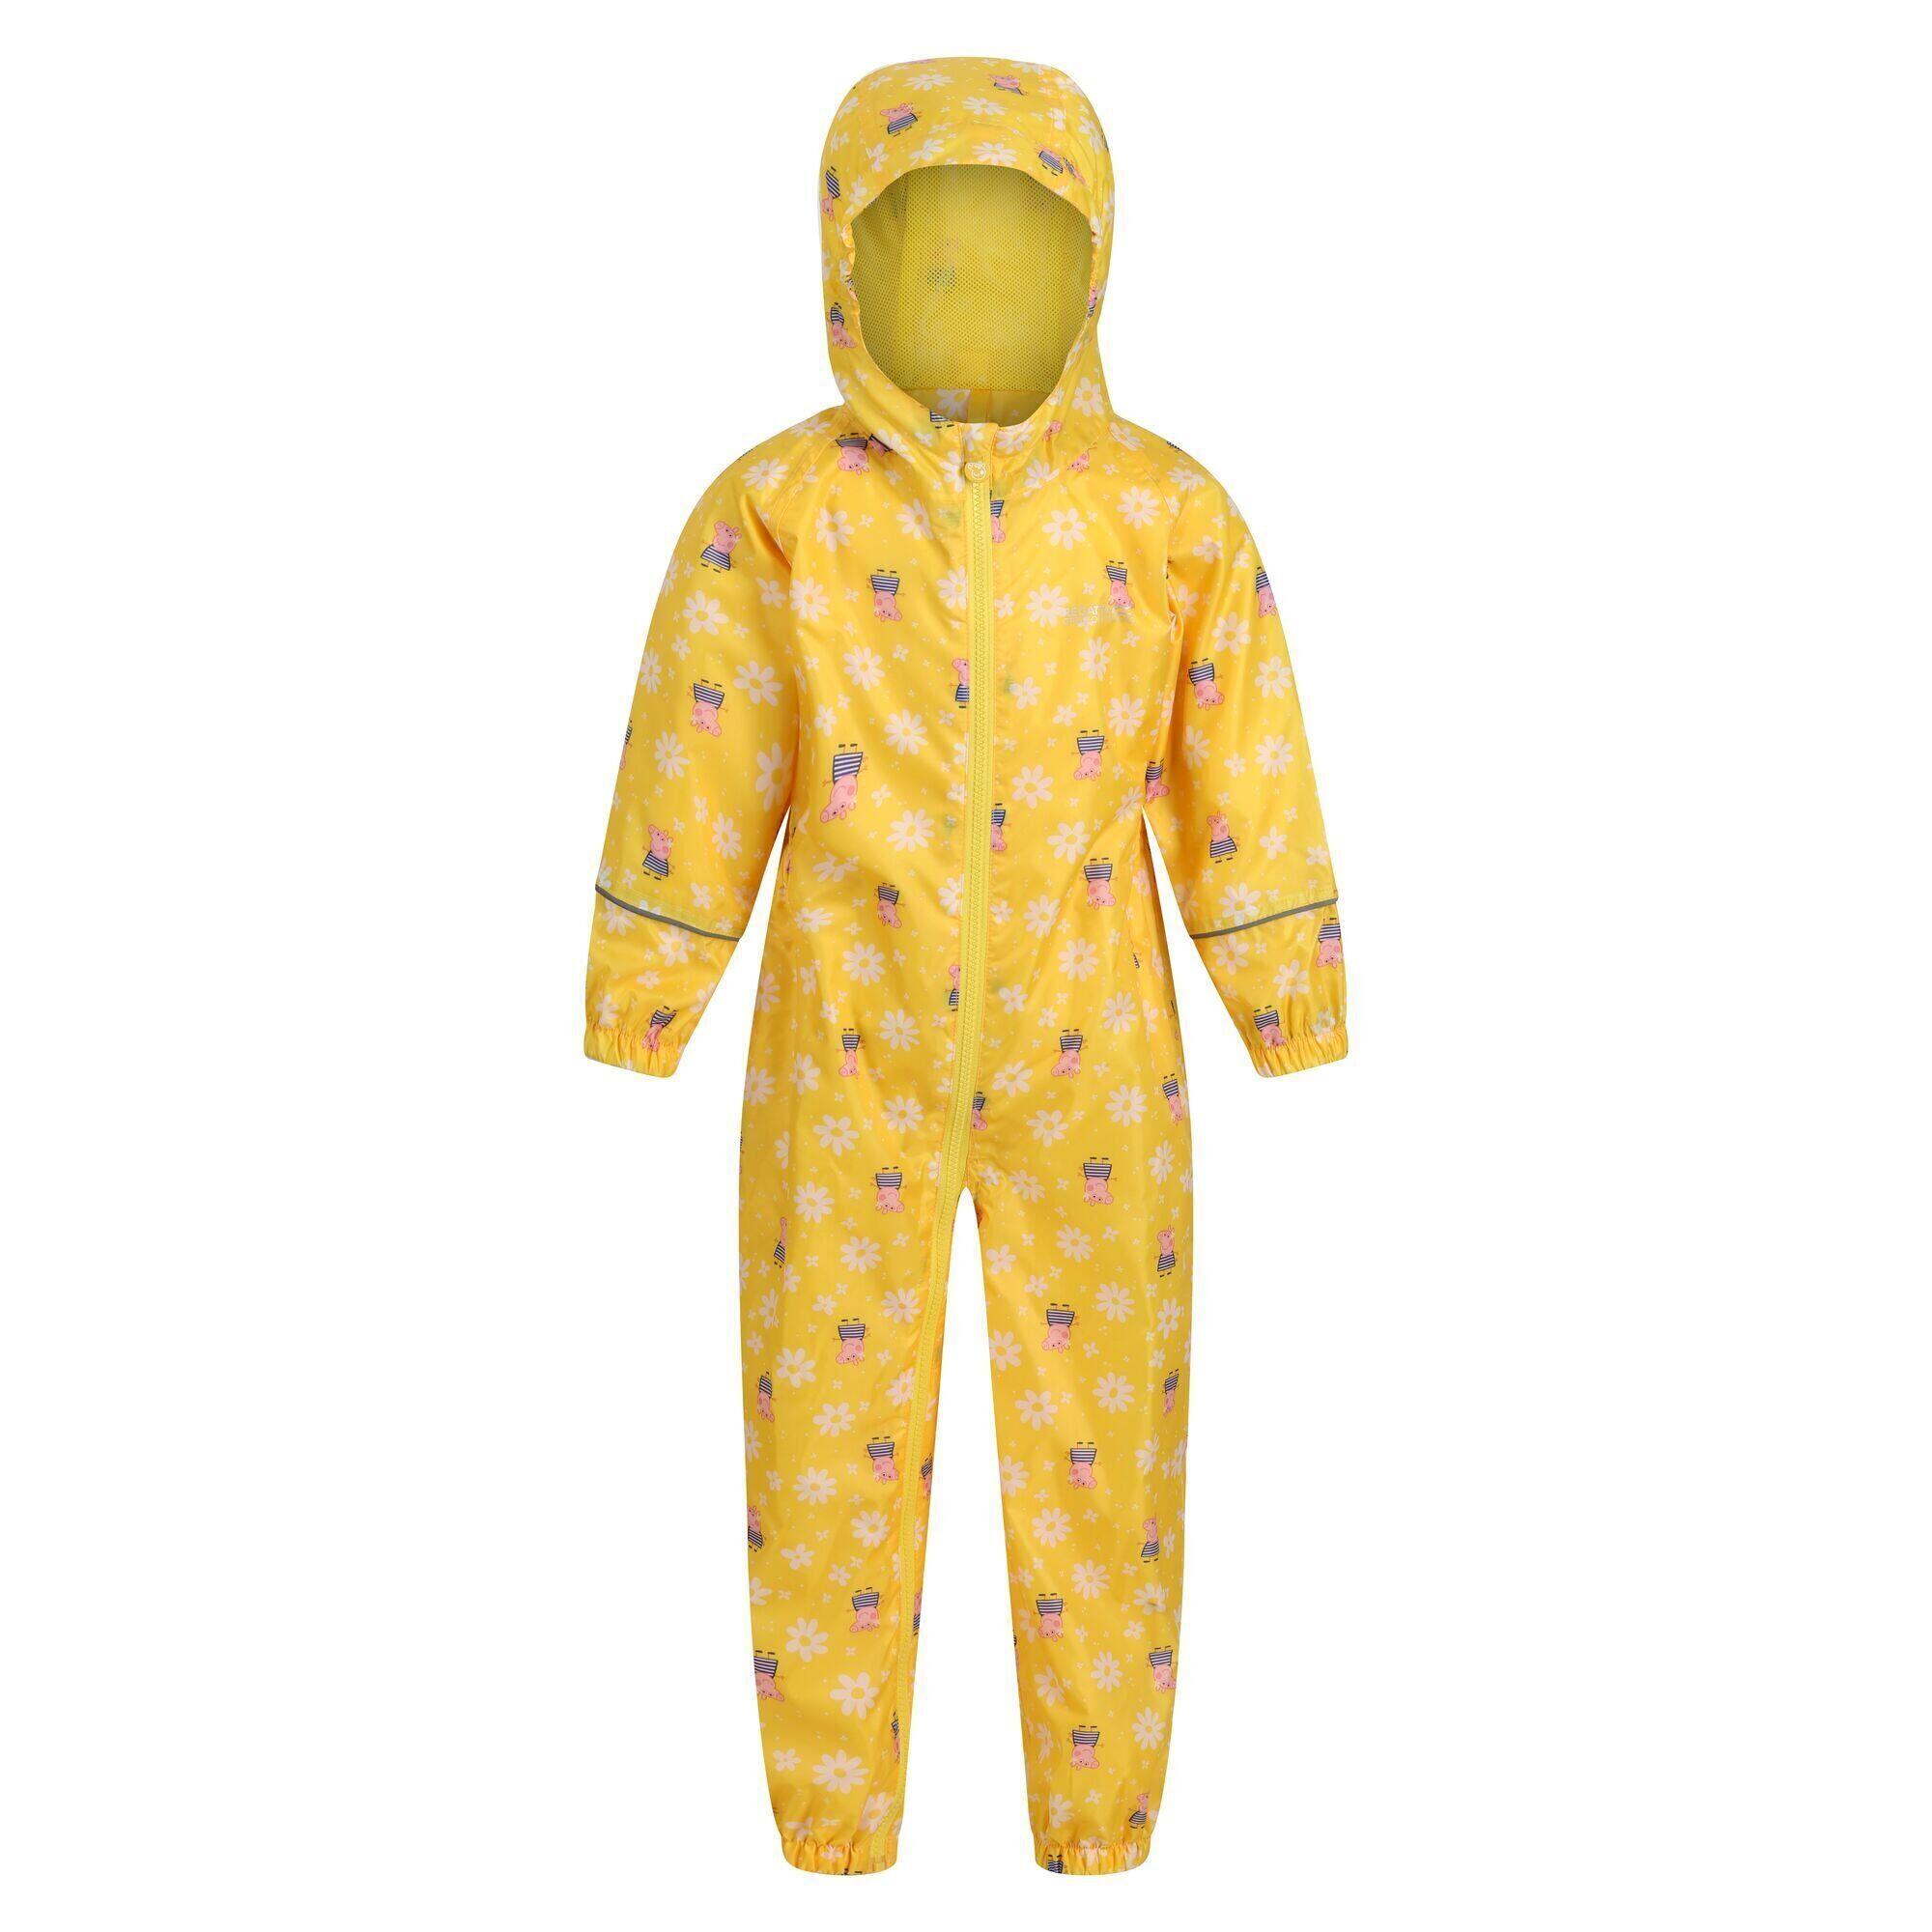 Childrens/Kids Pobble Peppa Pig Floral Waterproof Puddle Suit (Maize Yellow) 1/5